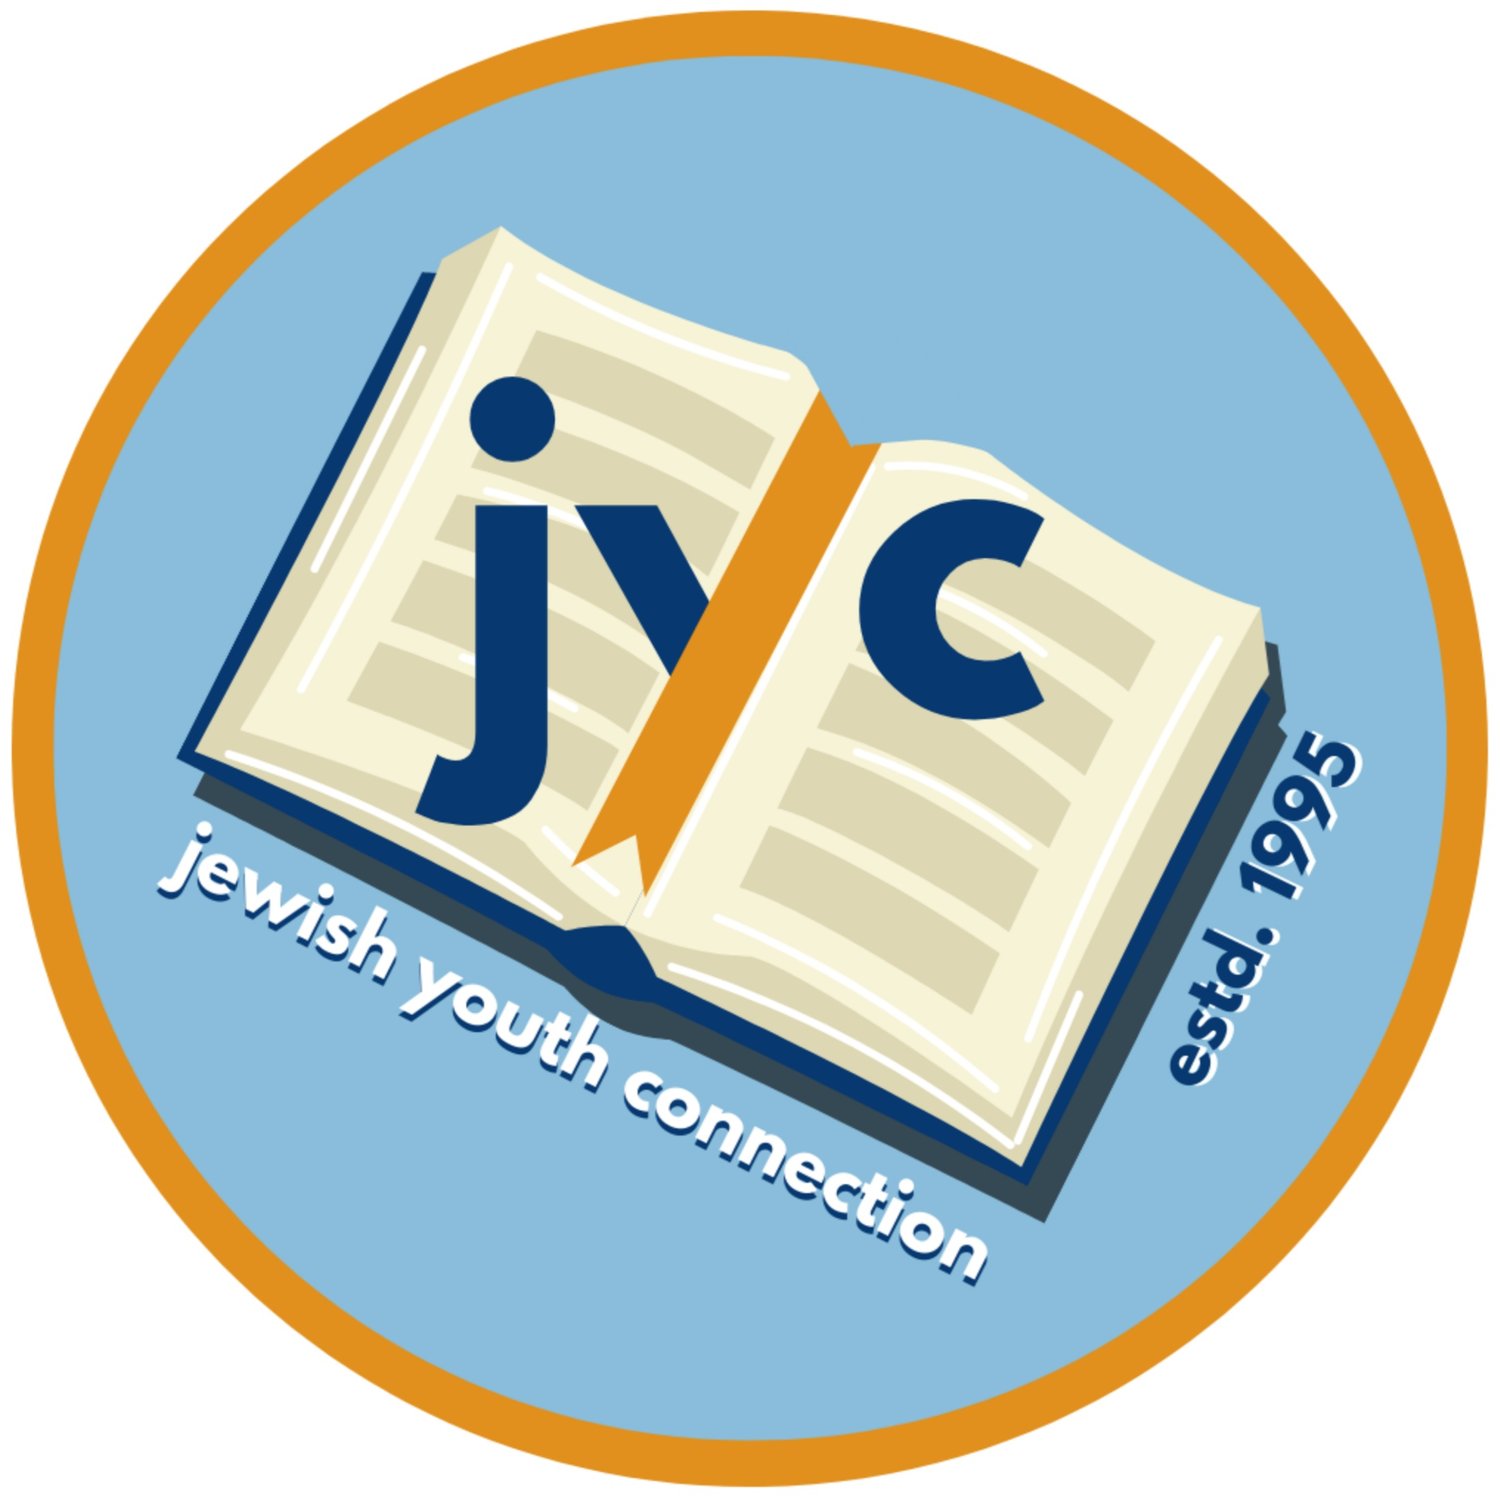 Jewish Youth Connection